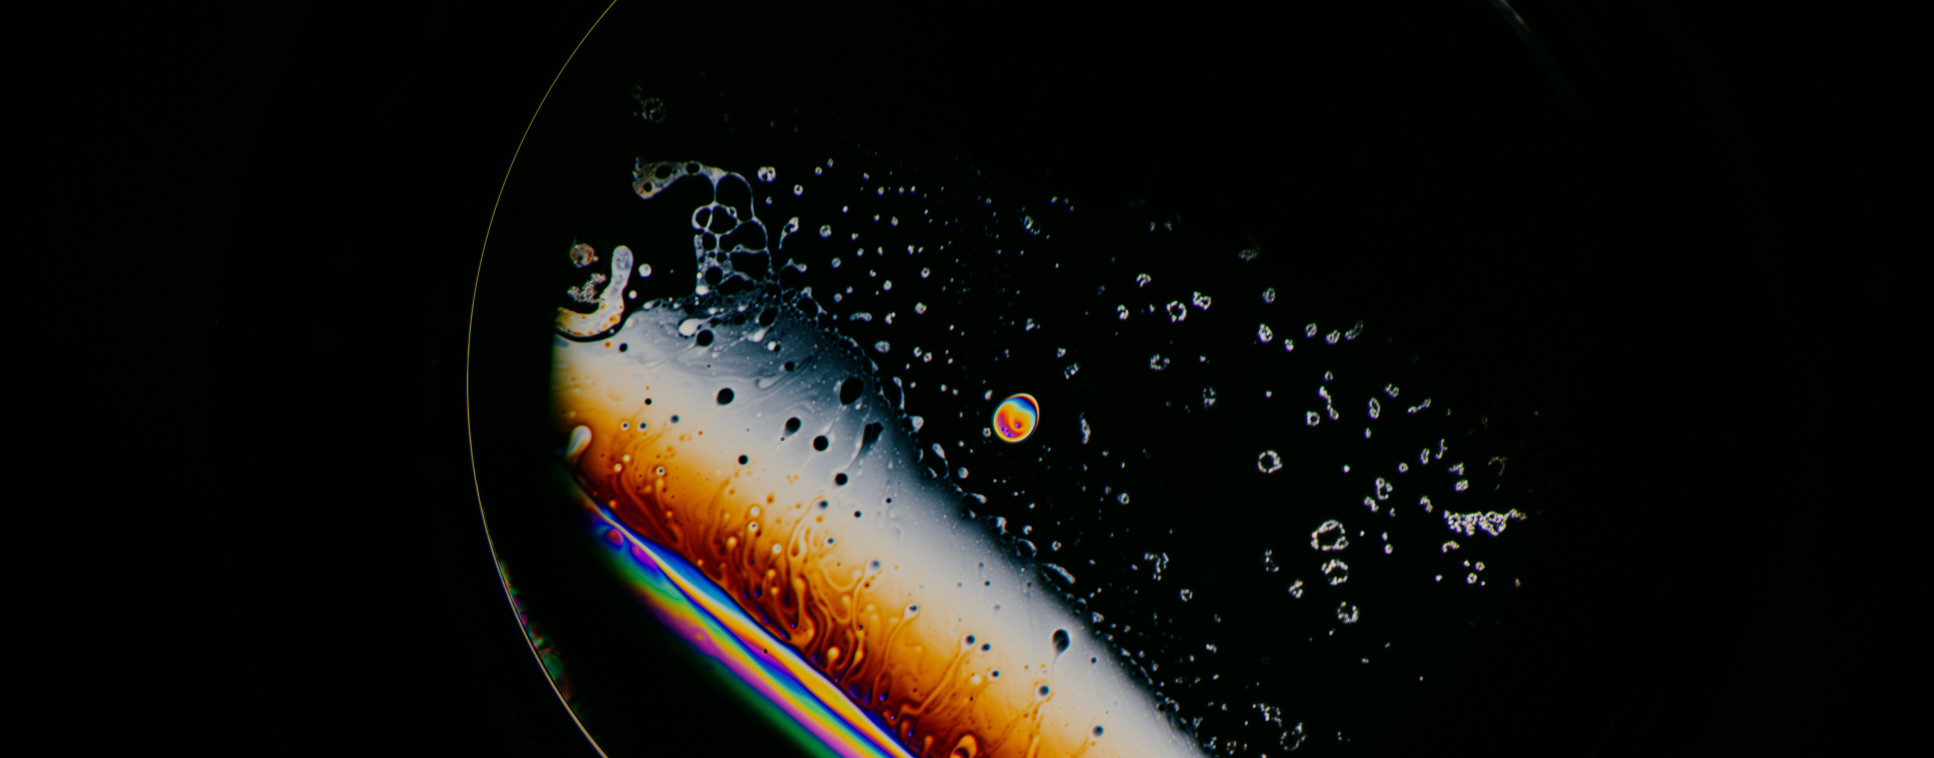 “Space Oddity” Drainage patterns on a bubble film